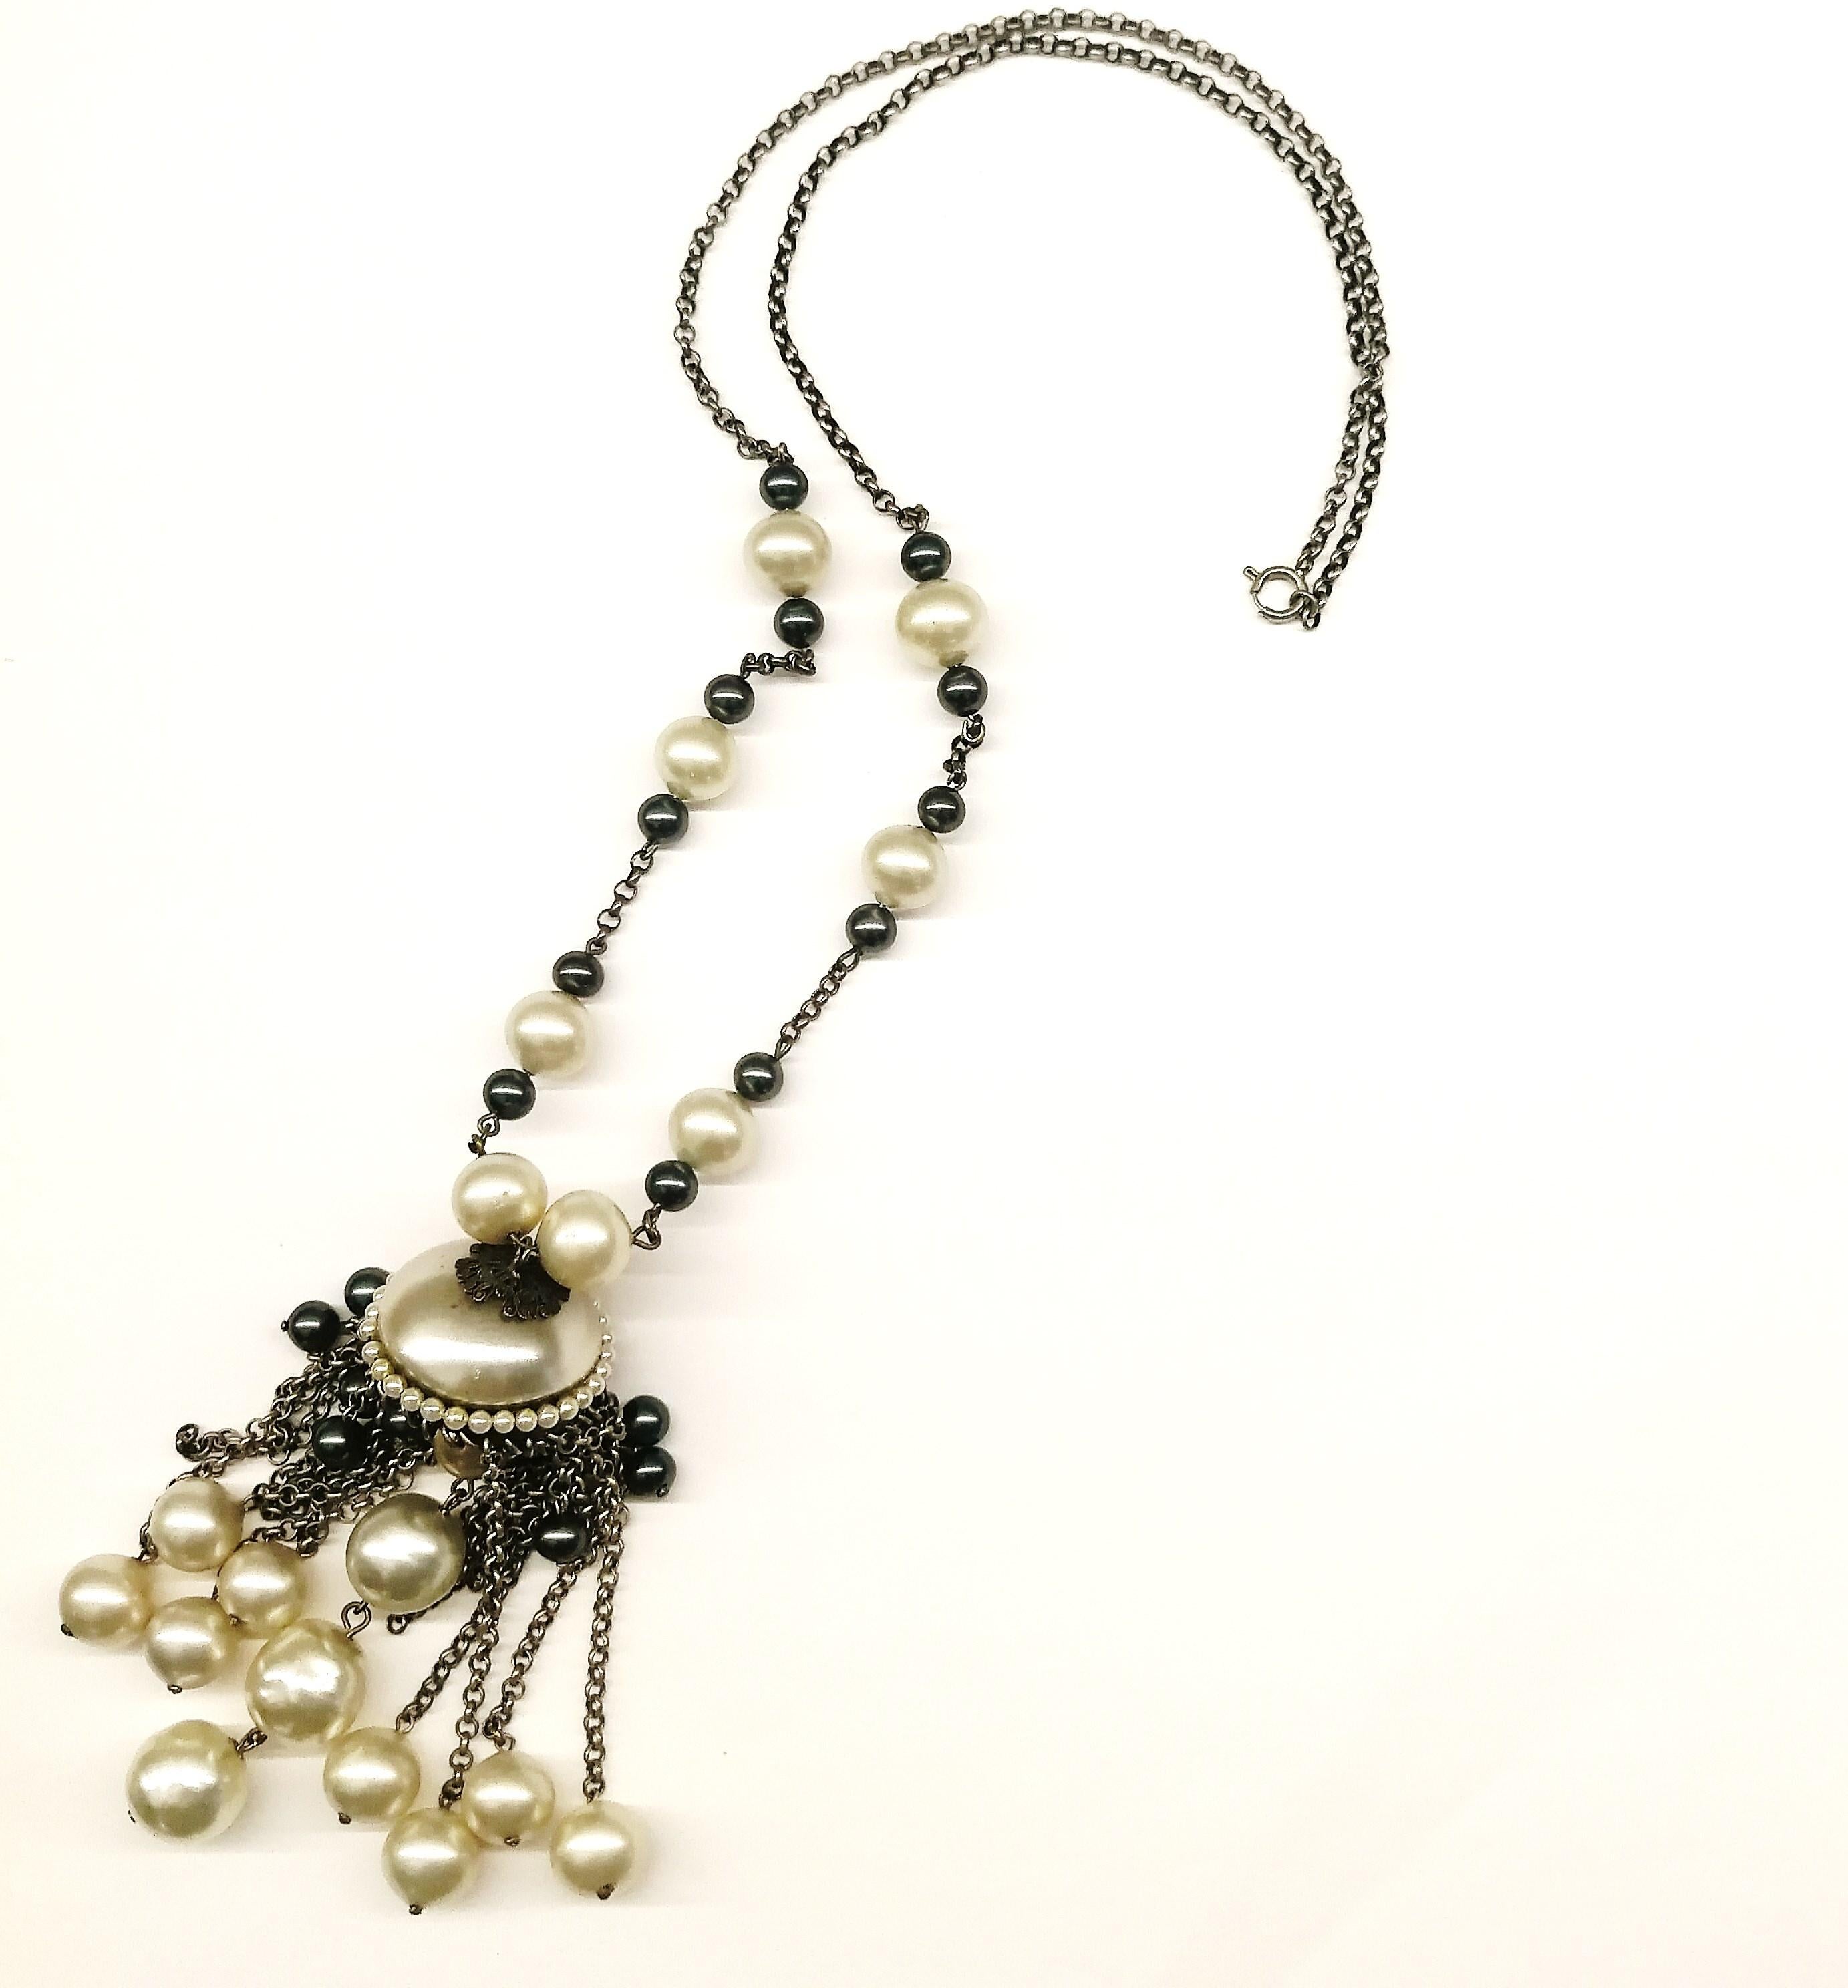 A large and striking sautoir necklace, with a full and graduated pendant, with baroque pearls of assorted sizes, in steel grey and cream, with darkened chain. It is attributed to Louis Rousselet from Paris, by the quality and colour way of its